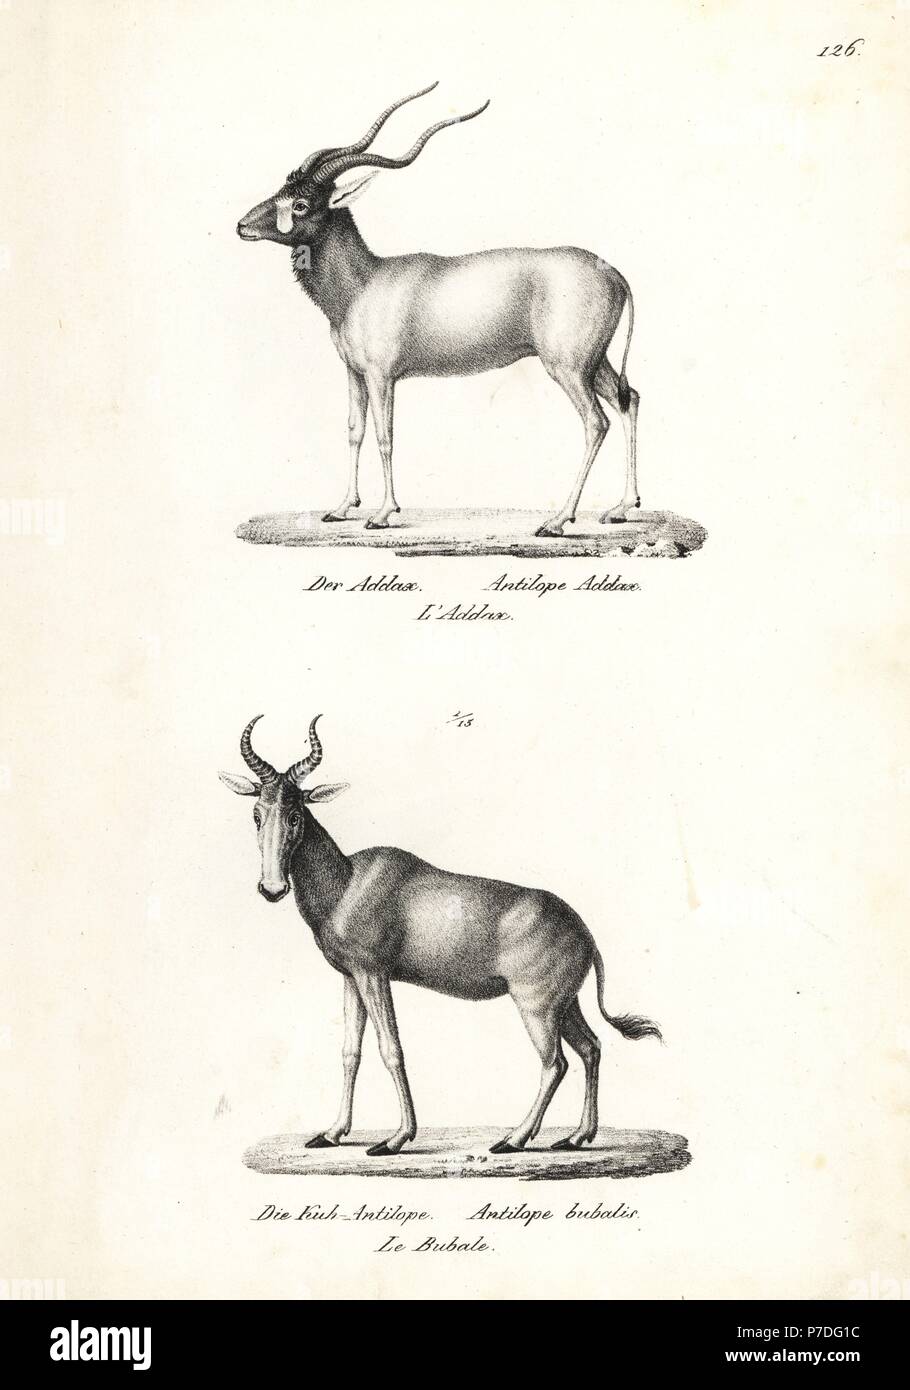 Addax antelope, Addax nasomaculatus (critically endangered) and Bubal hartebeest, Alcelaphus buselaphus buselaphus (extinct). Lithograph by Karl Joseph Brodtmann from Heinrich Rudolf Schinz's Illustrated Natural History of Men and Animals, 1836. Stock Photo